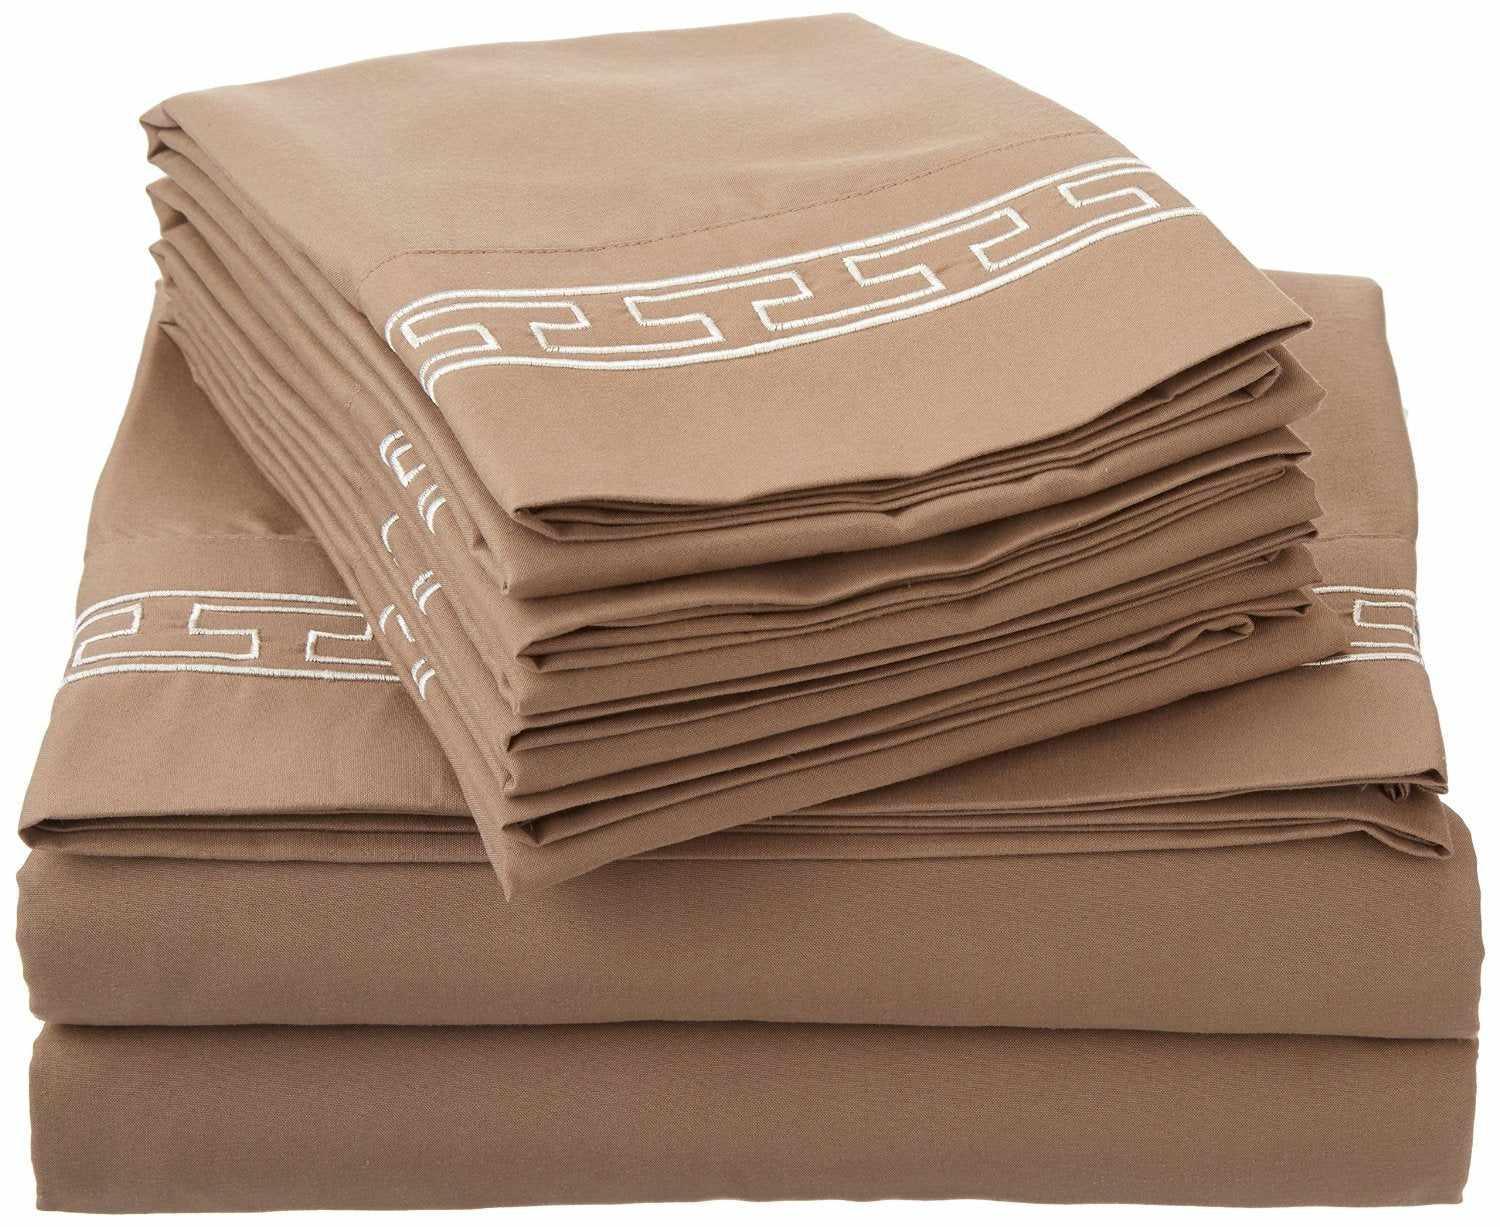  Superior 3000 Series Wrinkle Resistant Elegant Embroidered 6 Piece Sheet Set - Ivory/Taupe